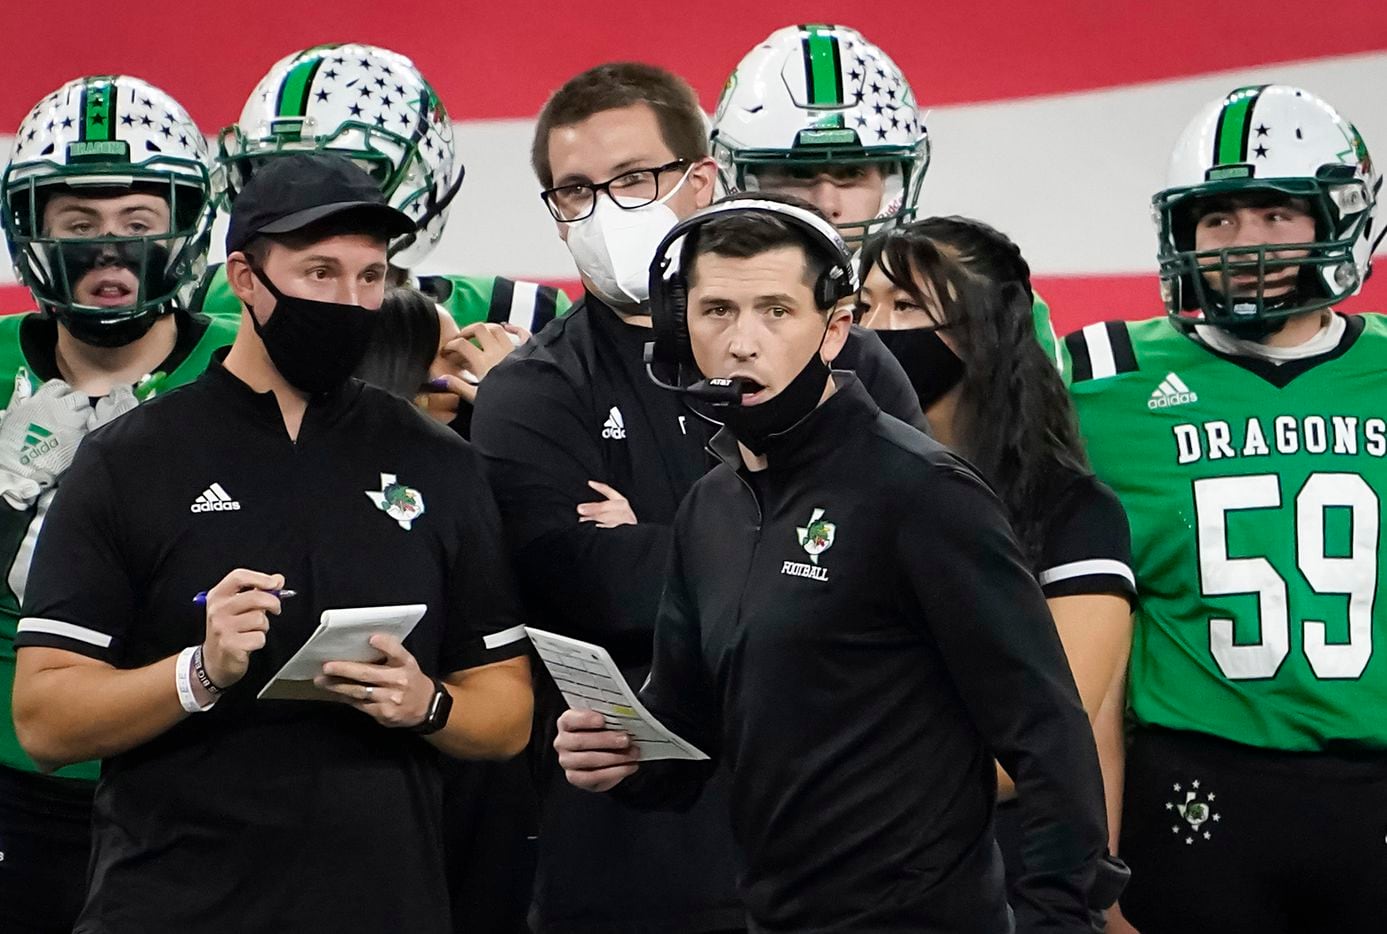 Southlake Carroll head coach Riley Dodge calls in a play during the first quarter of the Class 6A Division I state football championship game against Austin Westlake at AT&T Stadium on Saturday, Jan. 16, 2021, in Arlington, Texas. (Smiley N. Pool/The Dallas Morning News)